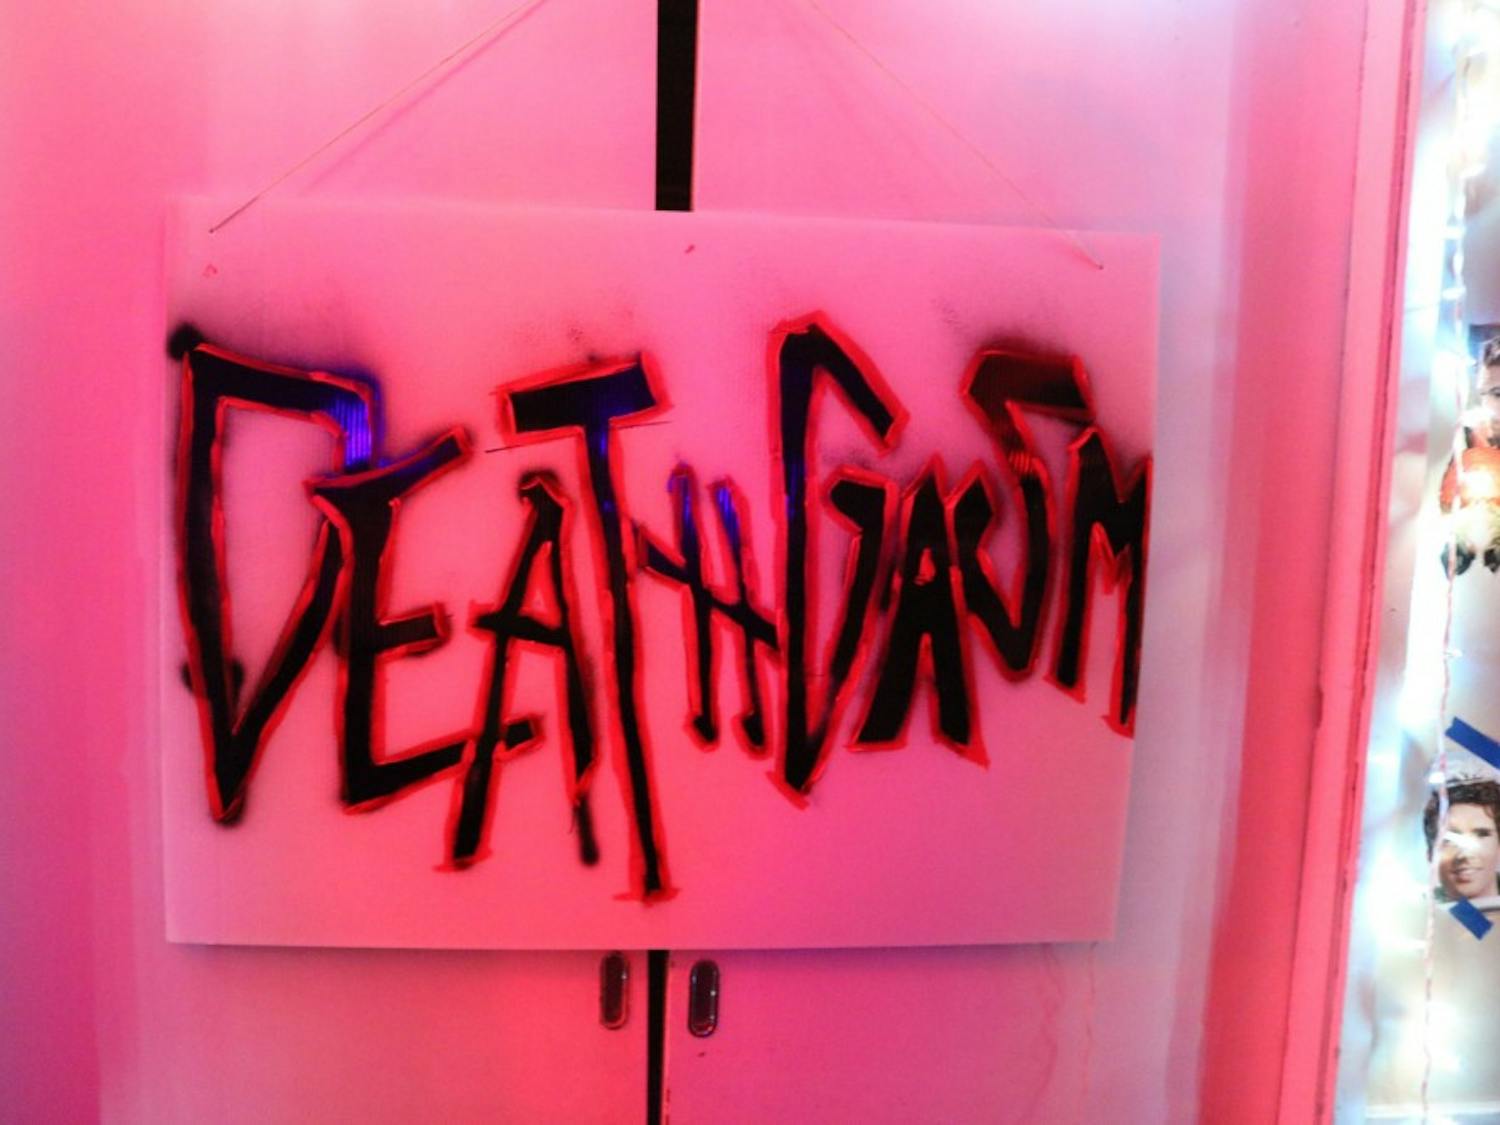 One of St. Anthony Hall's parties last year had the theme "Deathgasm" (courtesy Rachel Blythe)